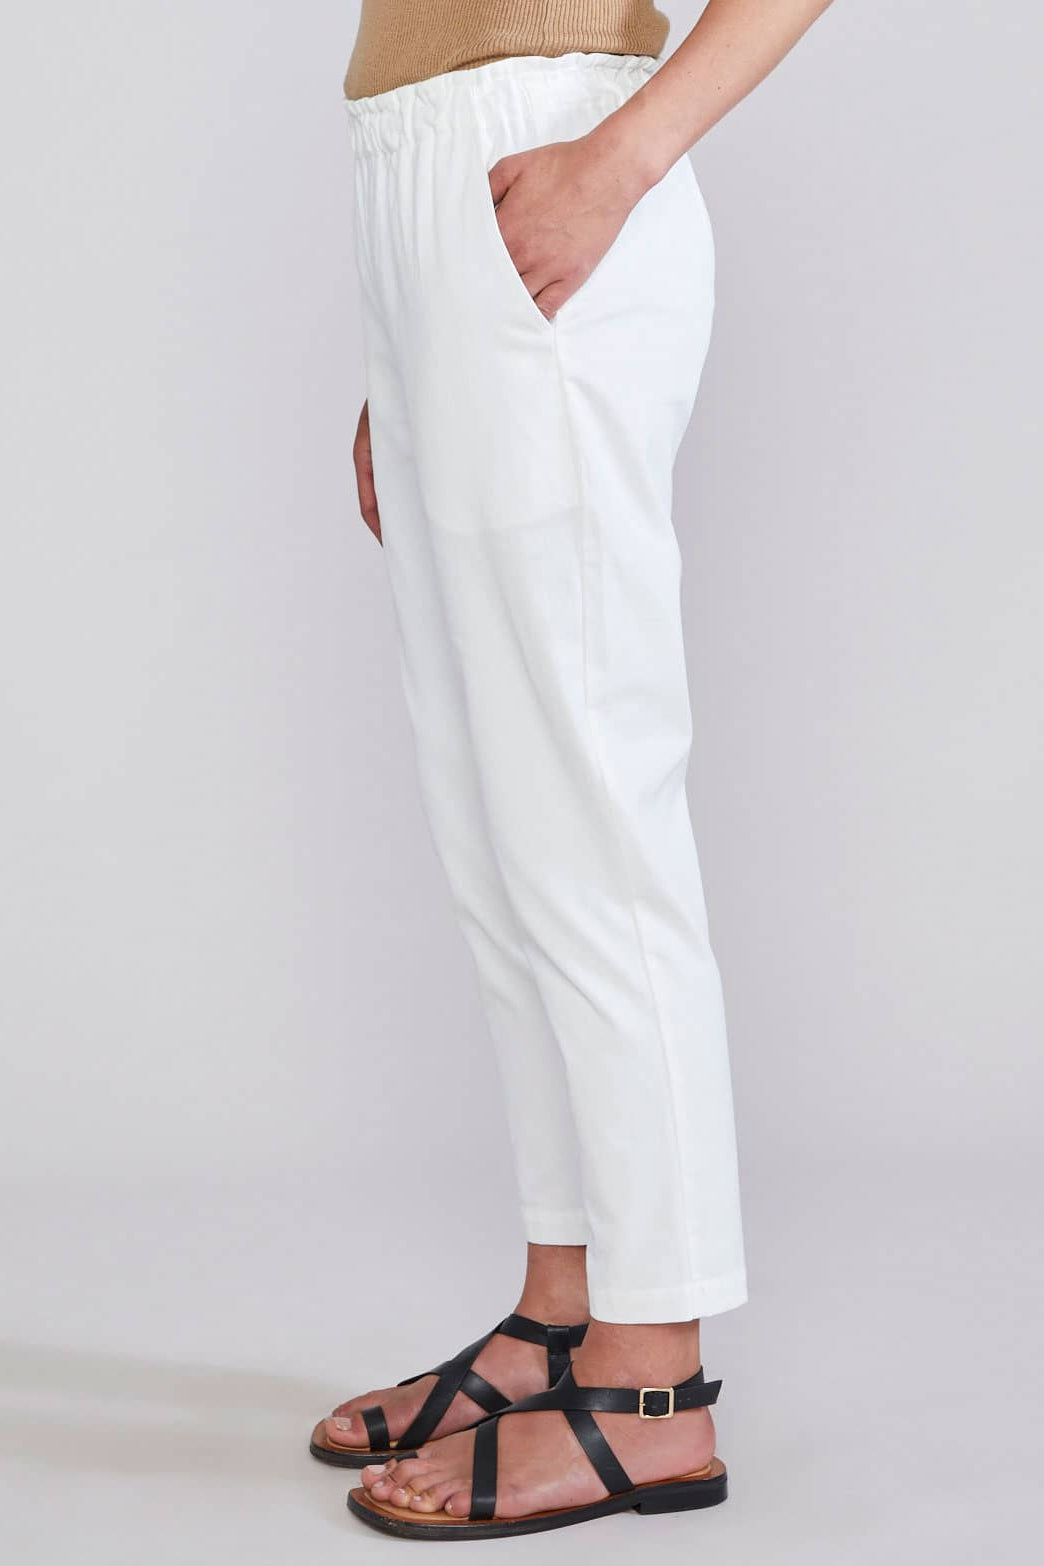 LAING STELLA DRAWSTRING PANT  The Laing Stella Drawstring Pants are the perfect basic wardrobe staple, now available in Black and White.